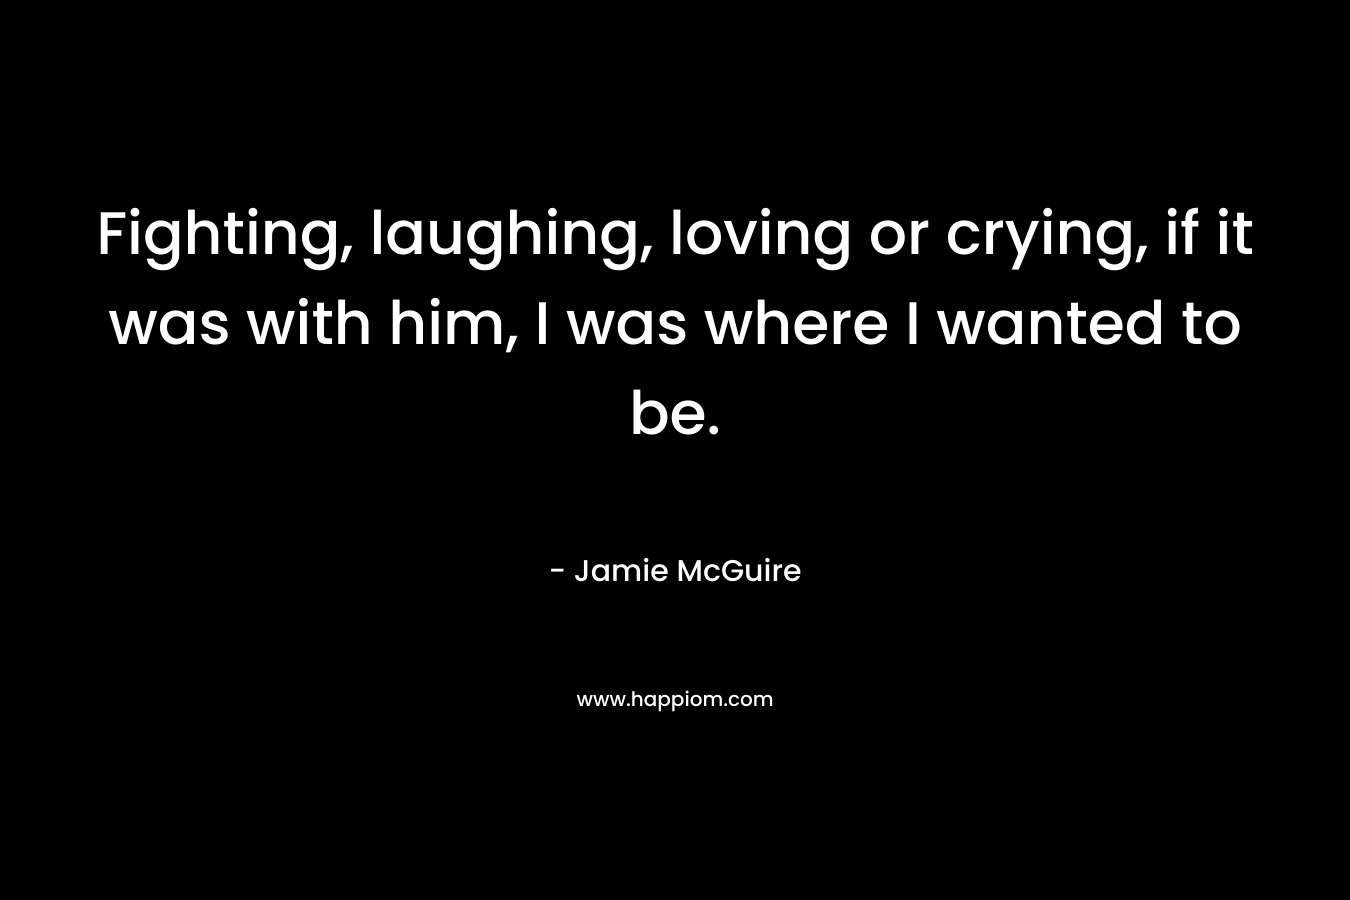 Fighting, laughing, loving or crying, if it was with him, I was where I wanted to be.